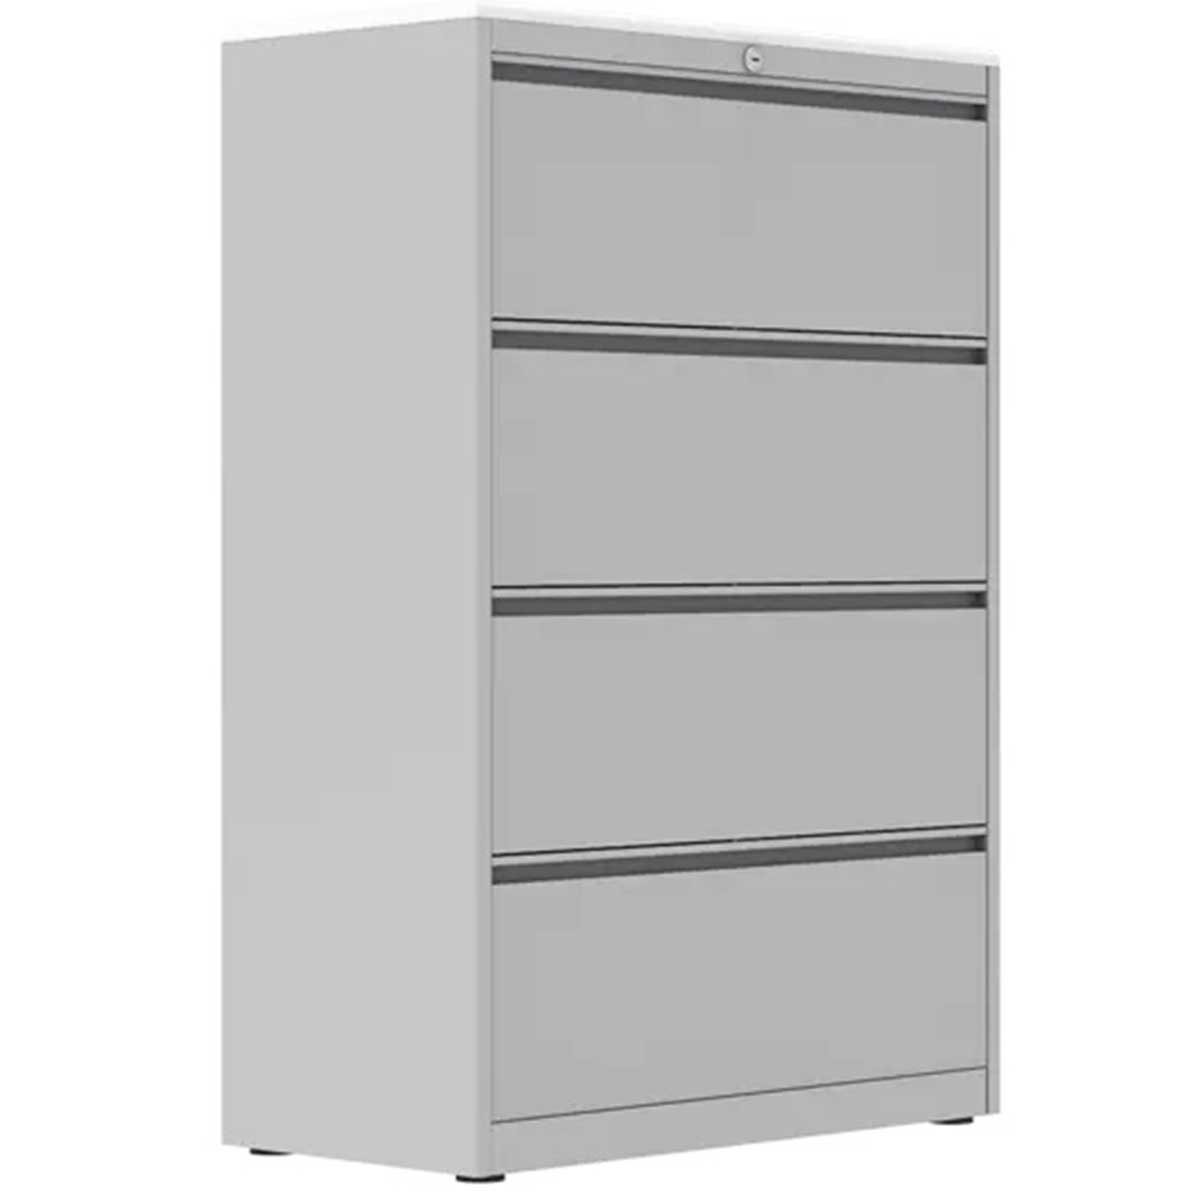 Fire Resistant File Cabinet Manufacturers, Suppliers in Noida